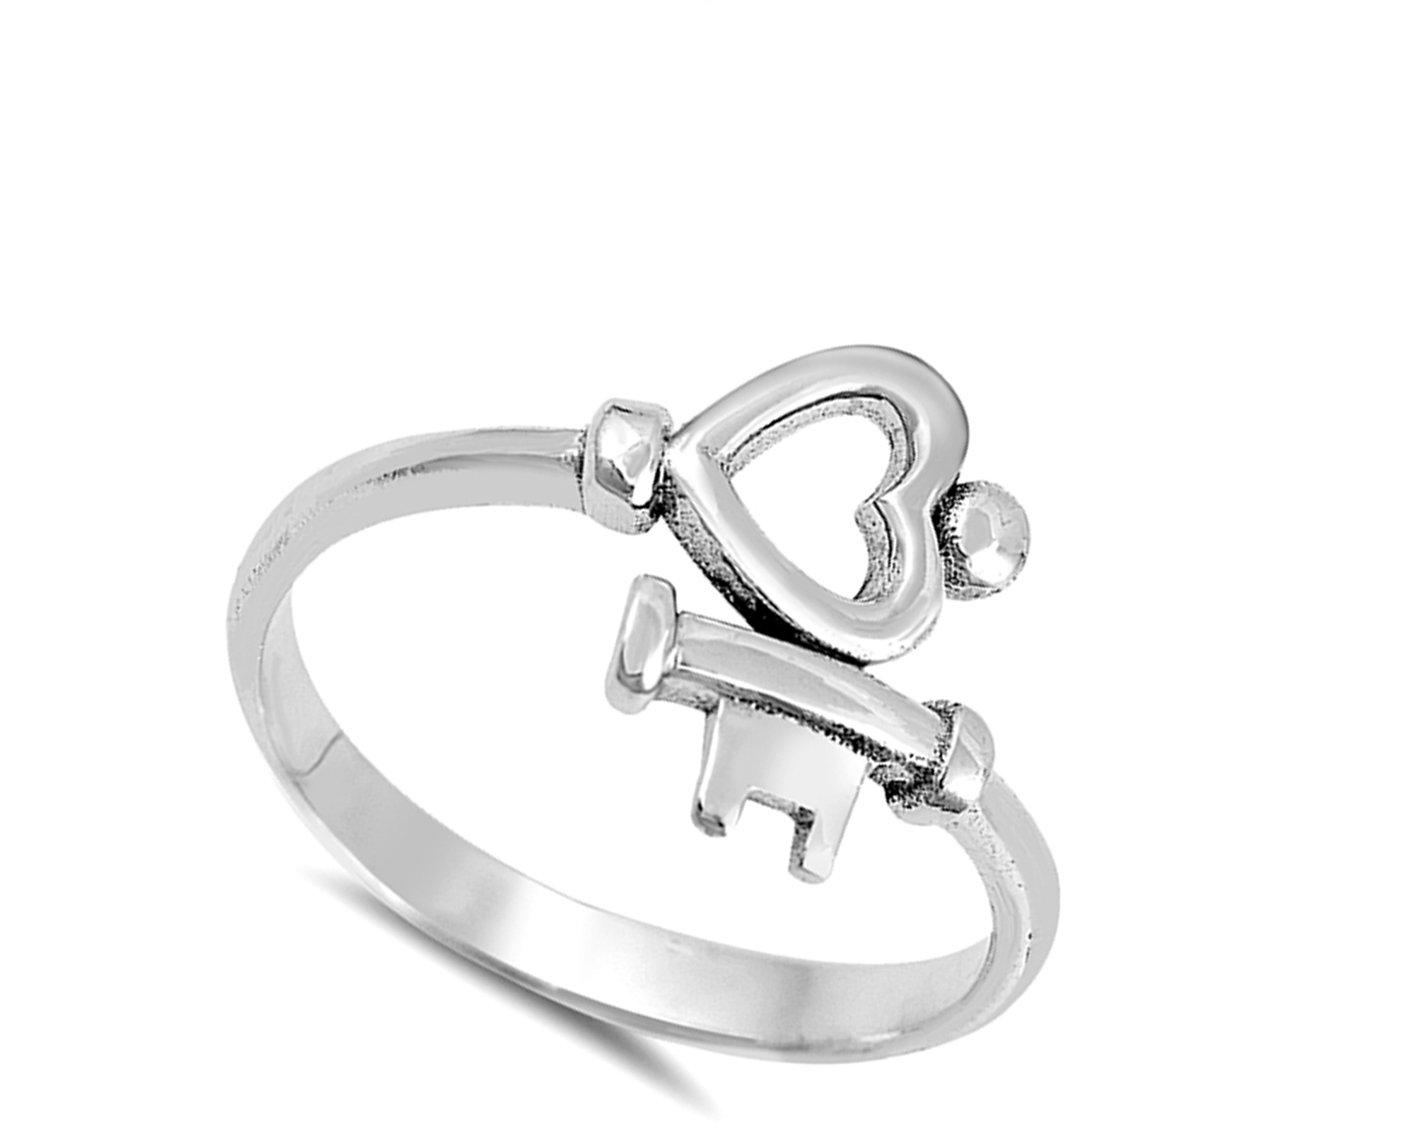 Heart Key Love Promise Ring New .925 Sterling Silver High Polish Band Size 9